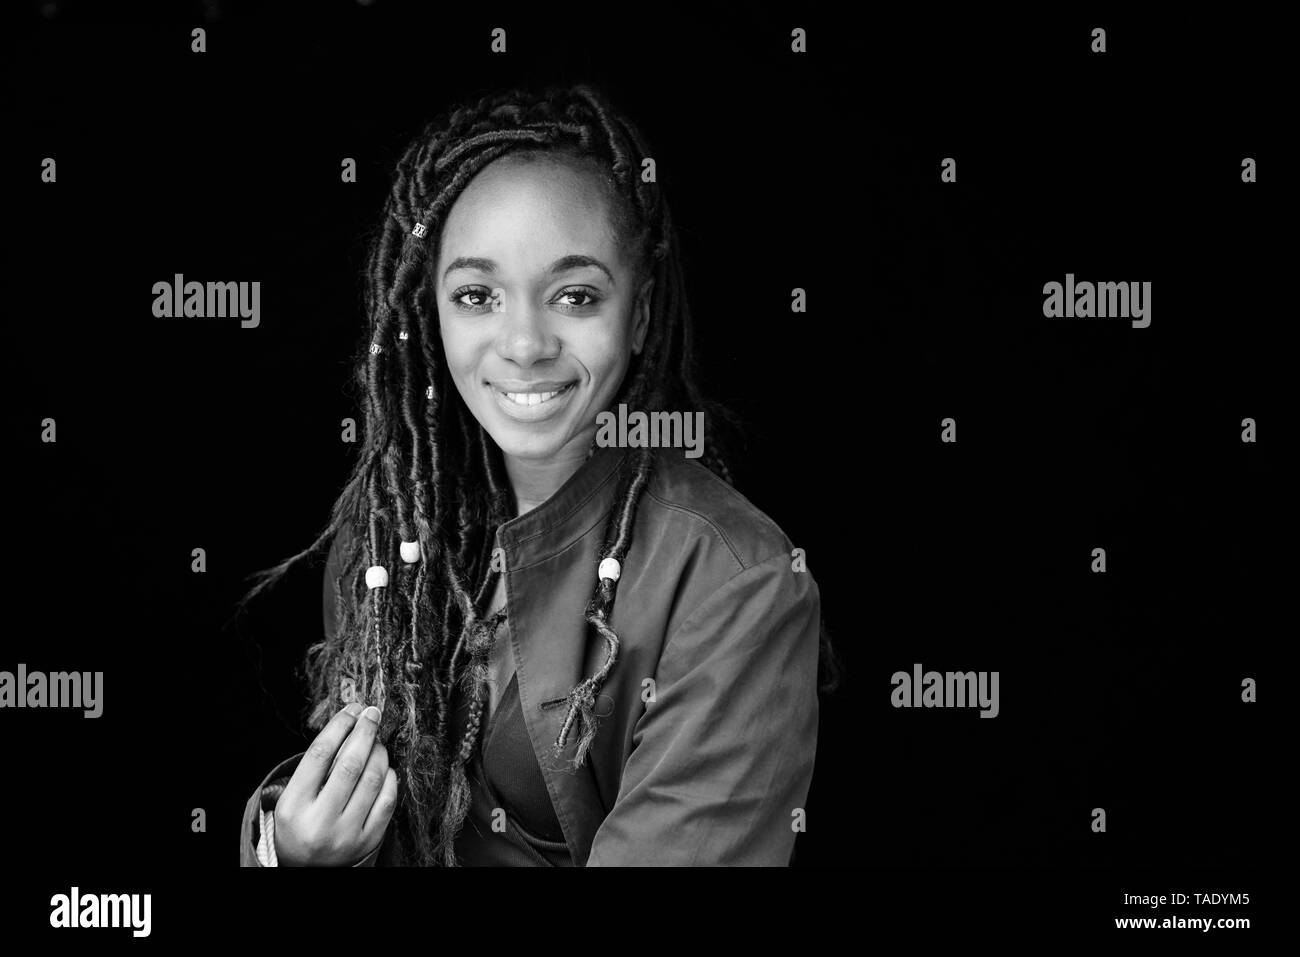 Portrait of smiling woman with dreadlocks in front of black background Stock Photo